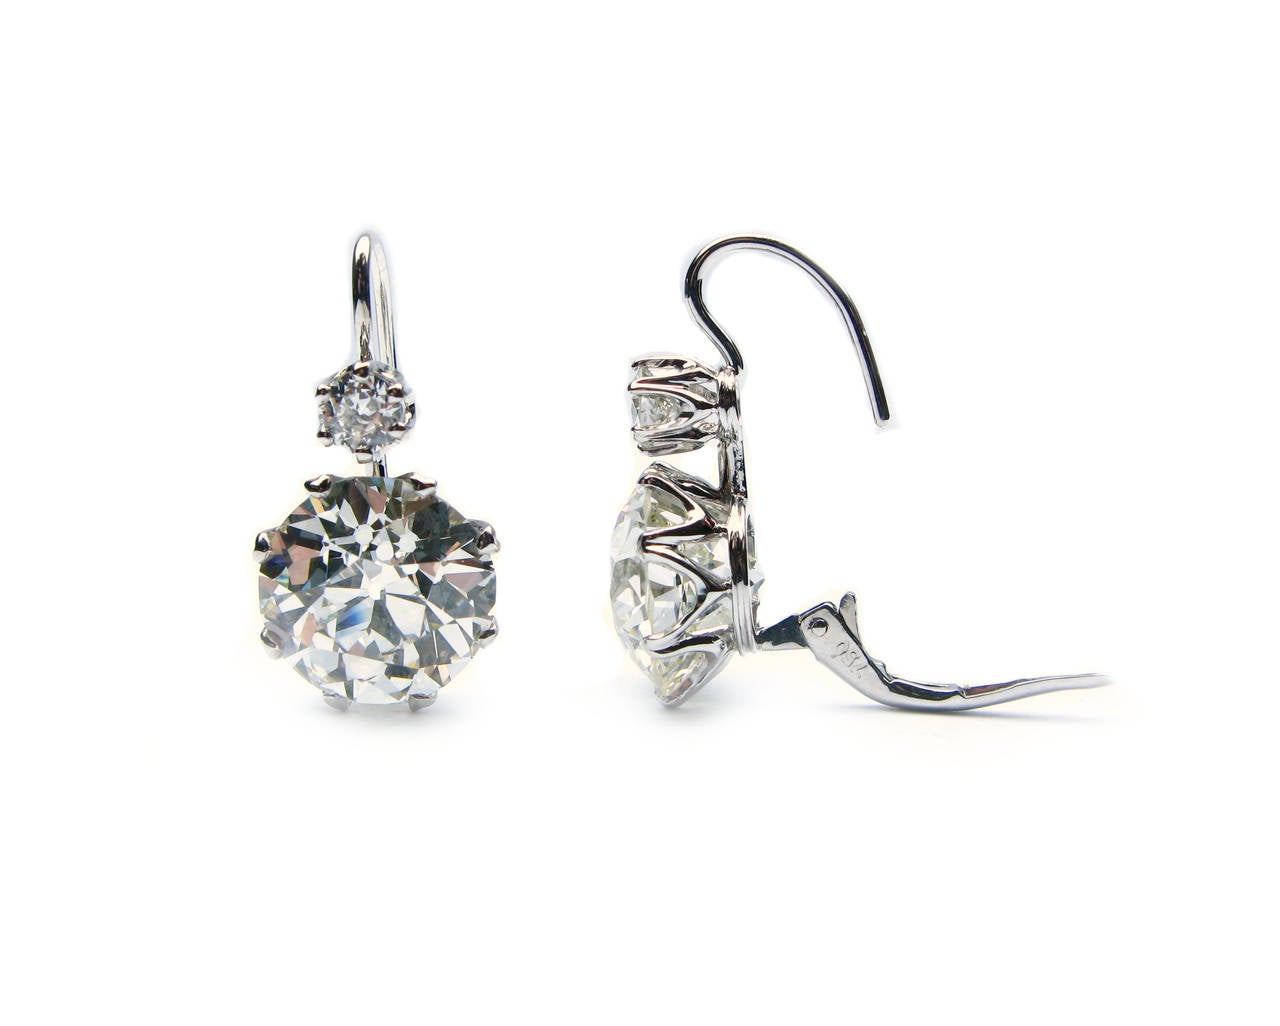 This stunning pair of platinum leverback earrings features a GIA certified 6.45ct, K color, VS1 clarity Old Euro diamond and a GIA certified 6.64ct, K color, VS2 clarity Old Euro diamond drop each with a 0.25ct Old Euro diamond top. These